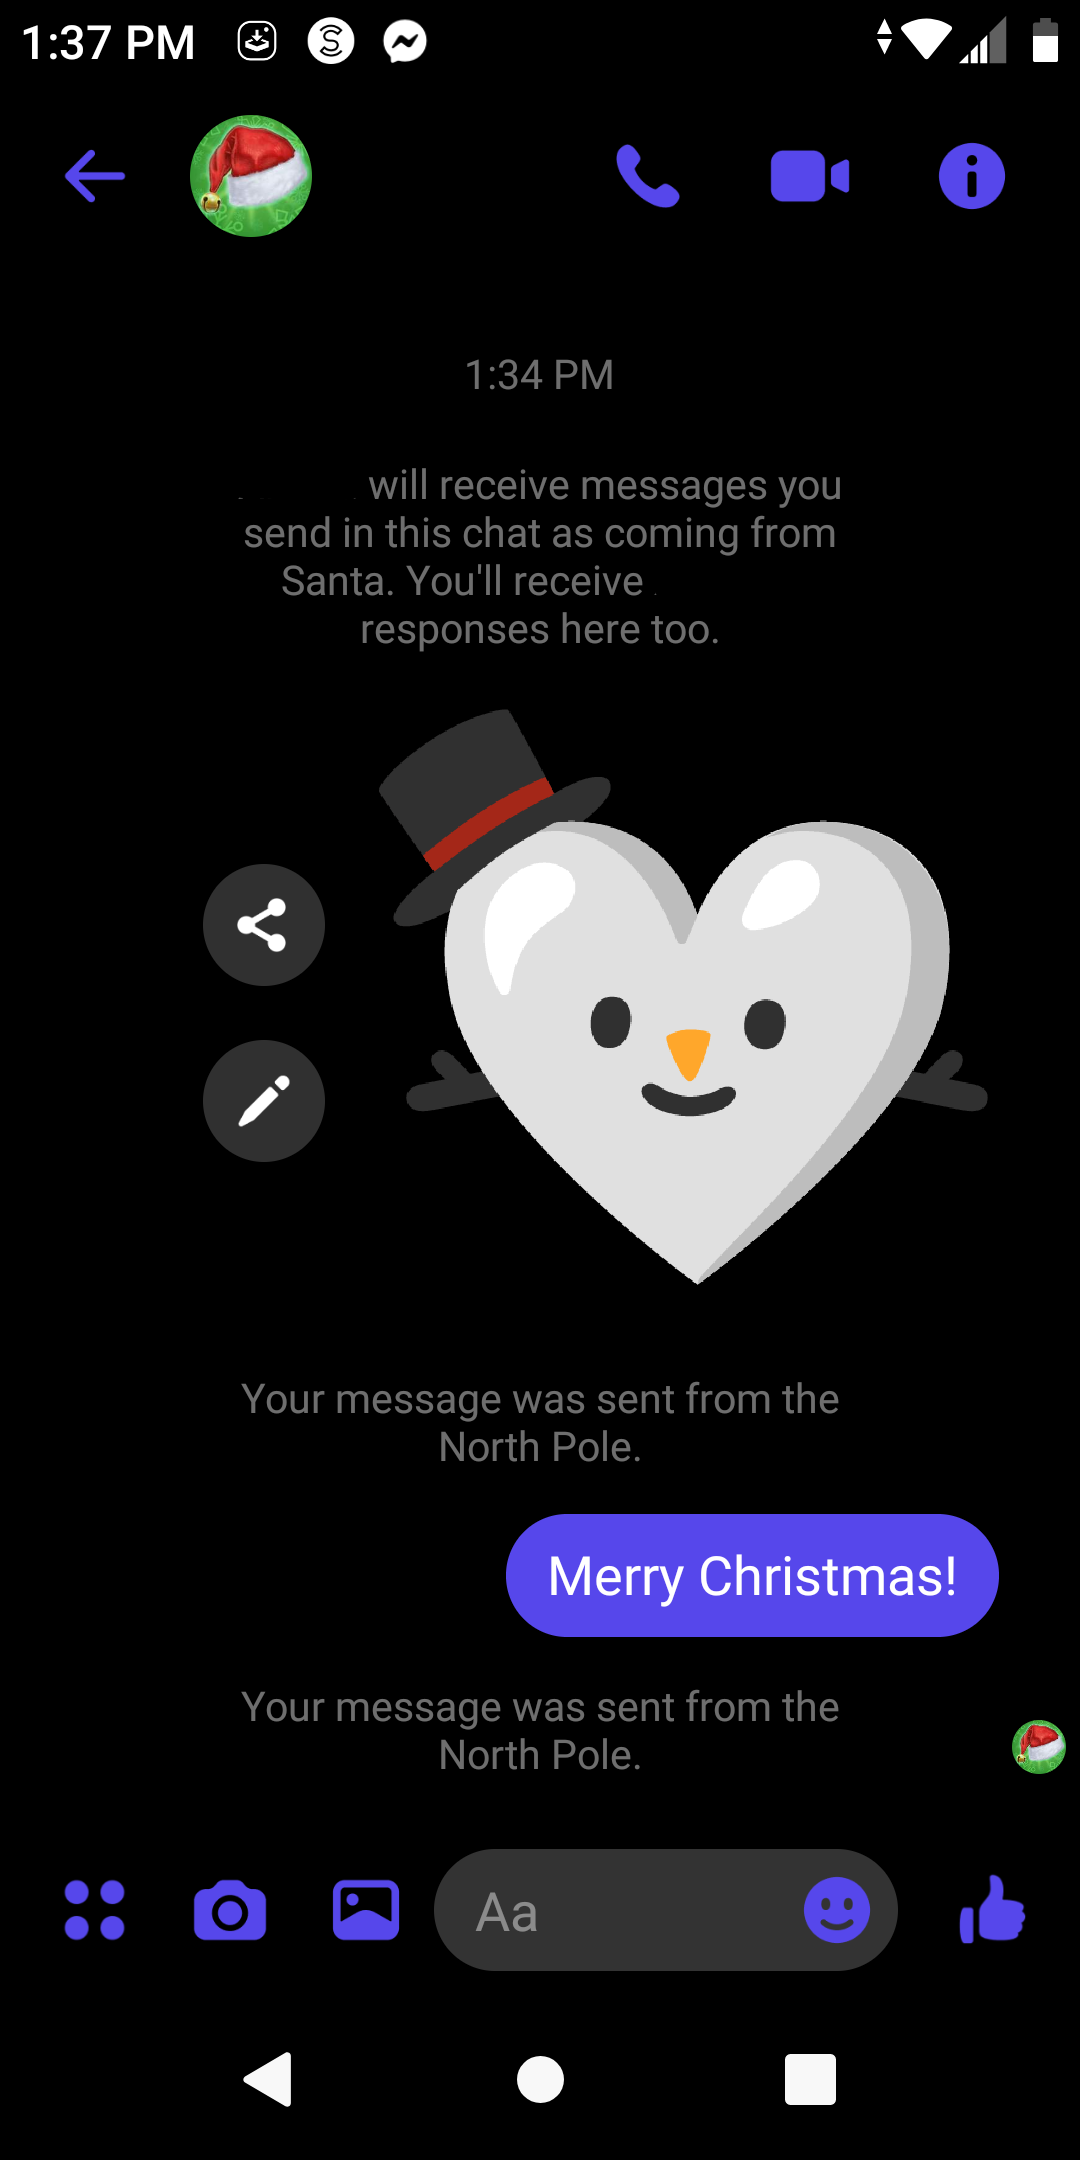 Your Kids Can Chat With Santa On Facebook Messenger Kids. Here's How.